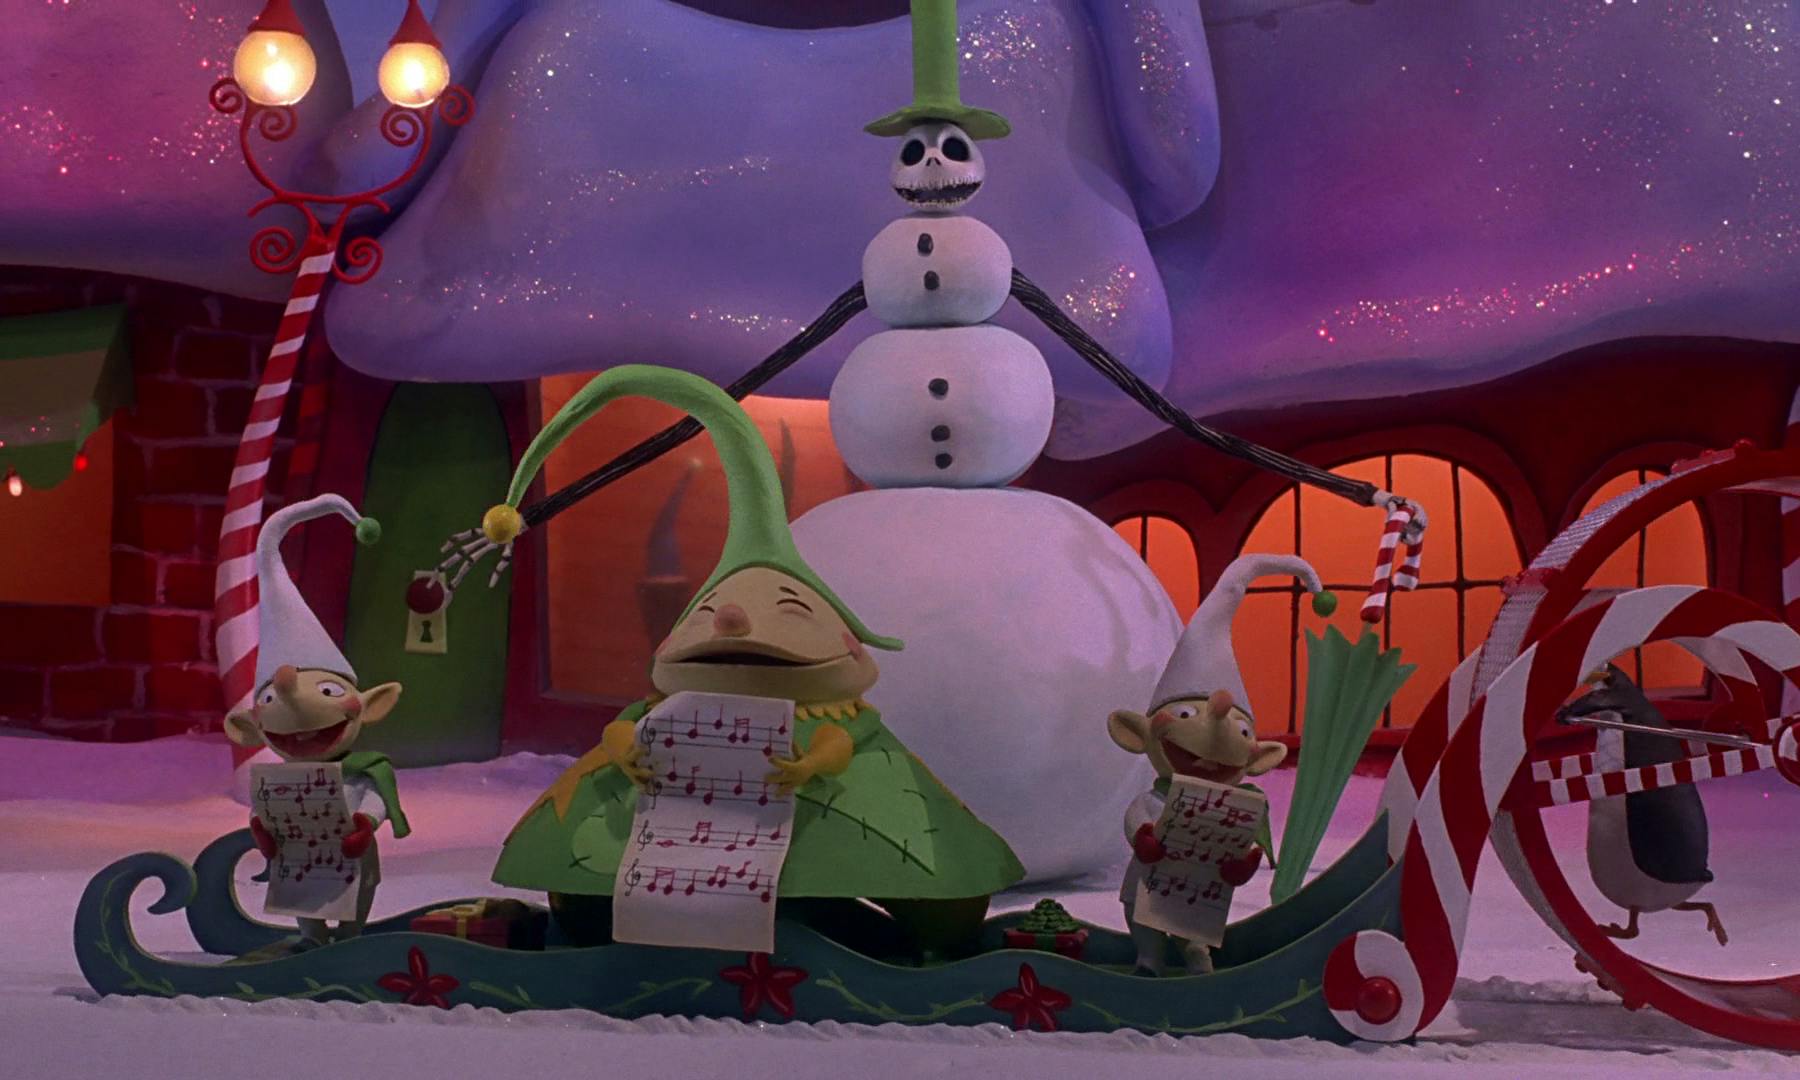  scene from the nightmare before christmas featuring the middle elf wearing an ugly christmas sweater